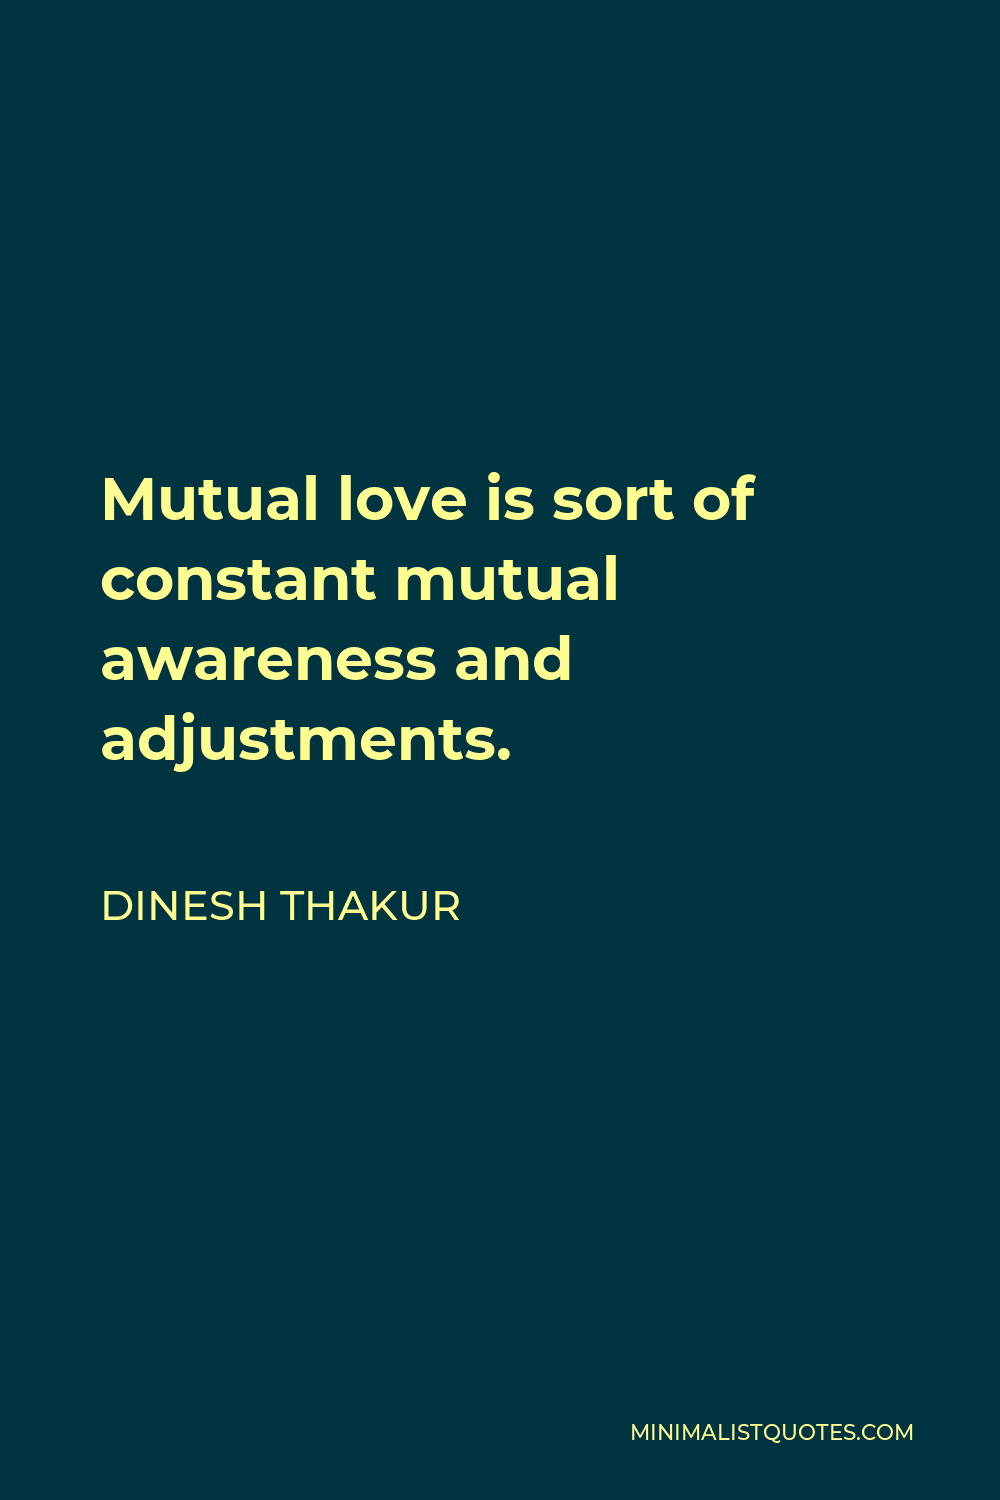 Dinesh Thakur Quote - Mutual love is sort of constant mutual awareness and adjustments.